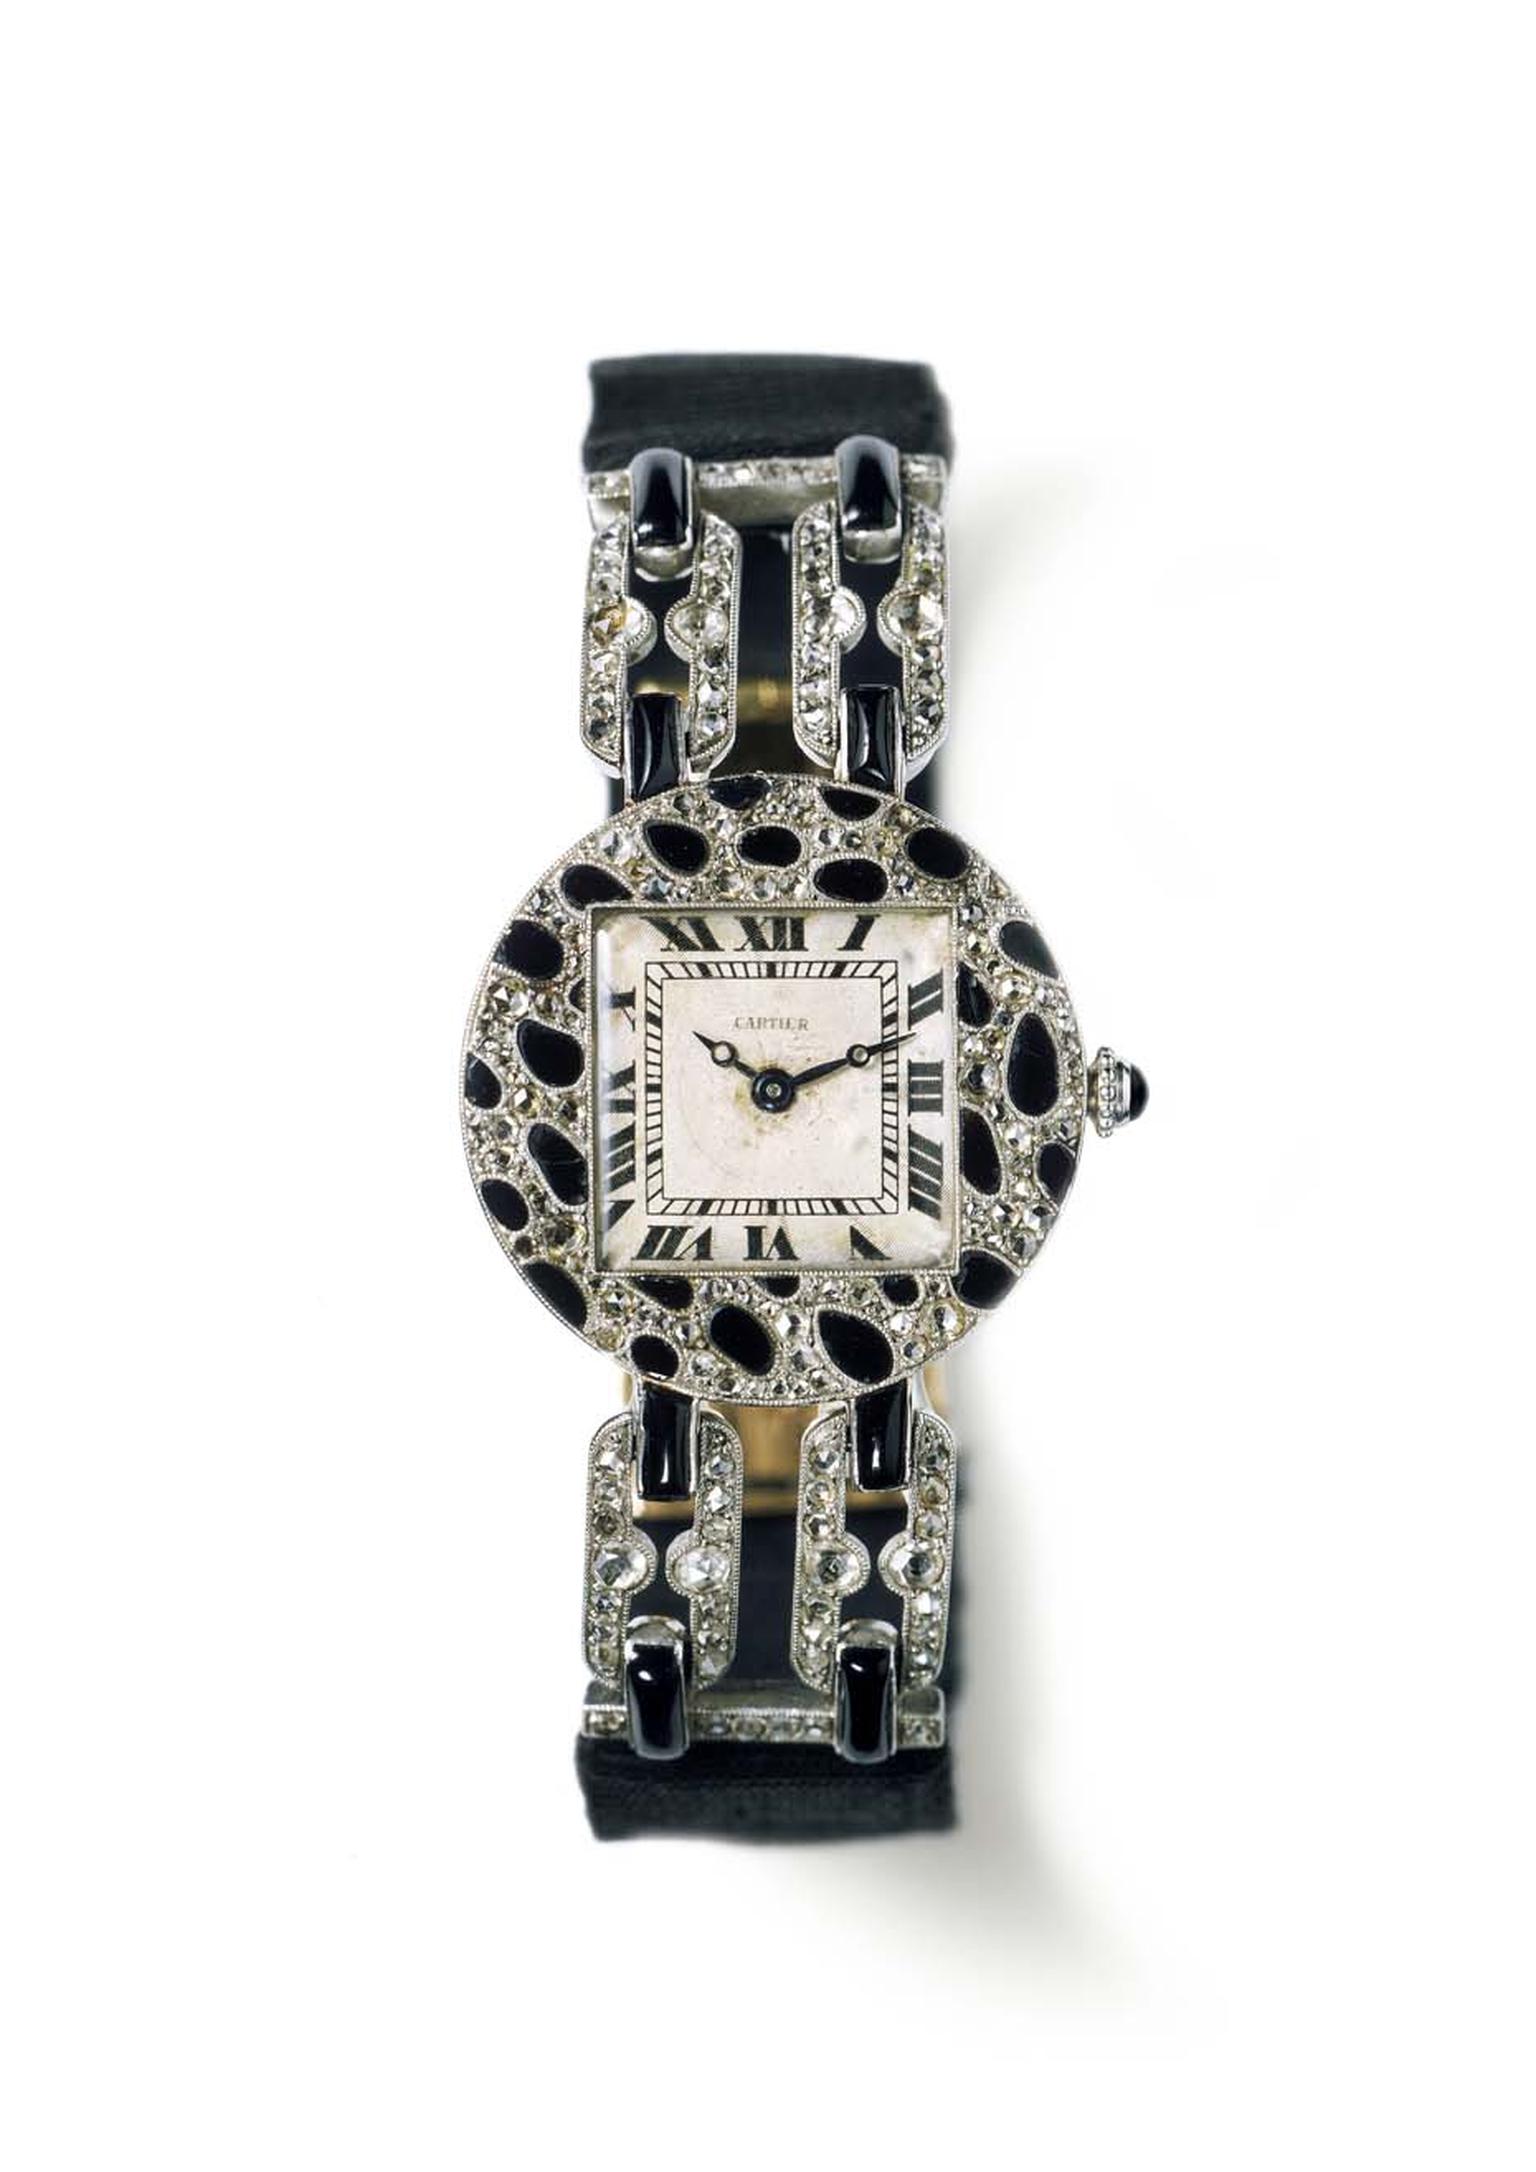 Cartier 1914 wristwatch with panther-spots motif features a round case in polished platinum, paved with rose-cut diamonds and onyx. Image by: Tania & Vincent © Cartier.